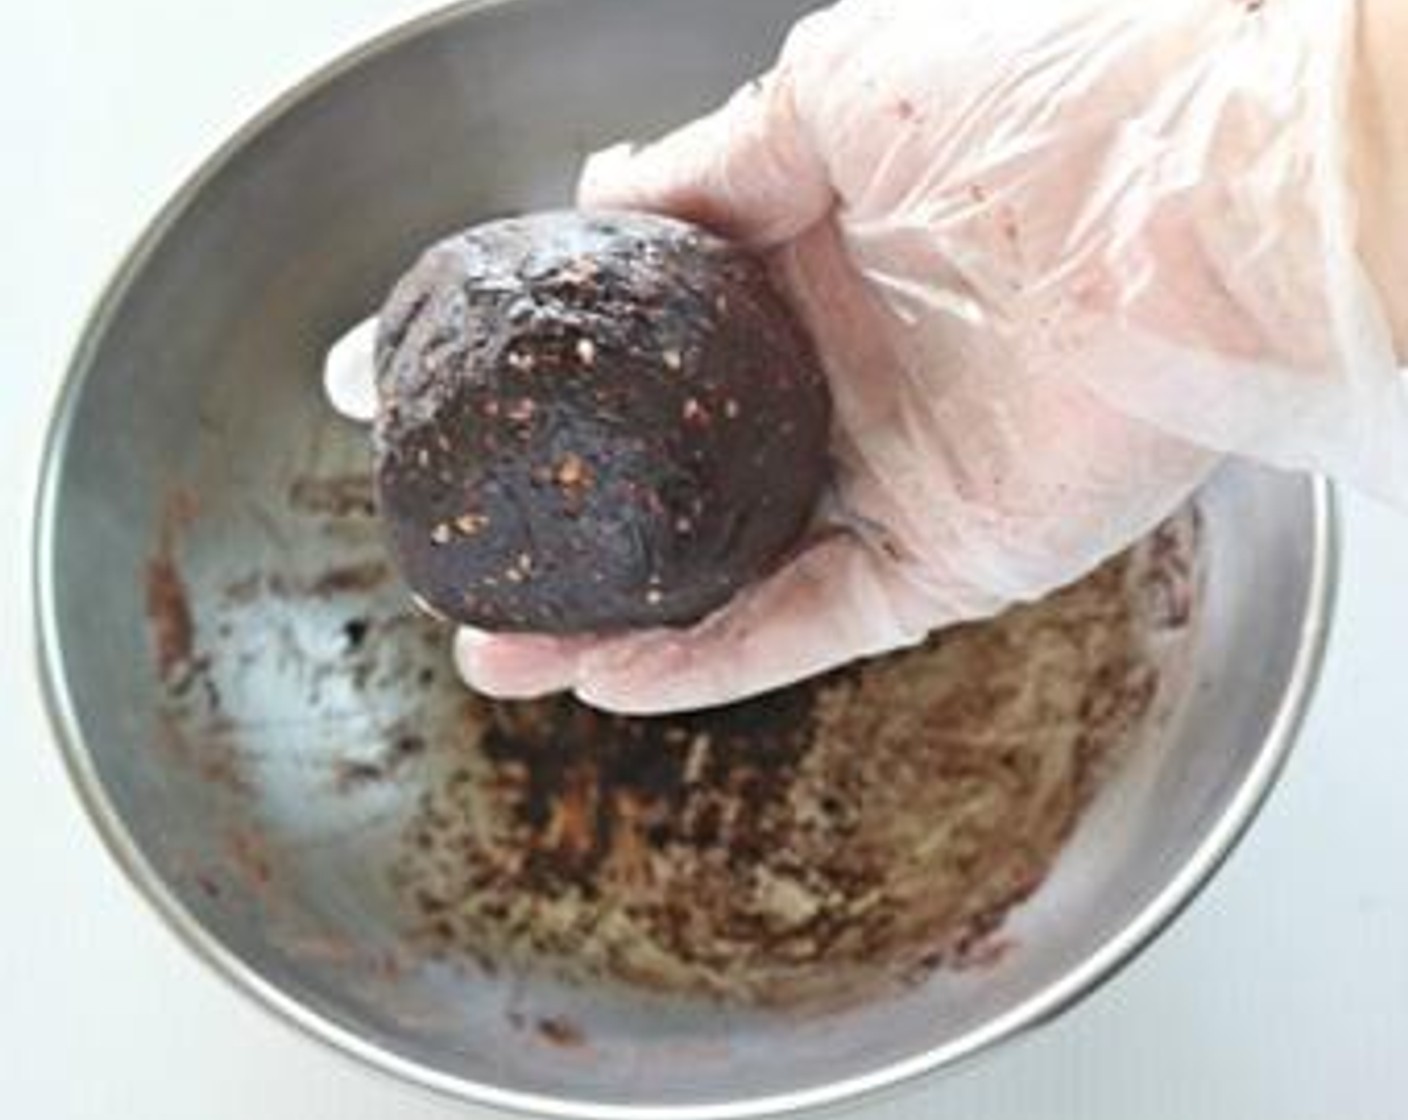 step 2 Make the filling by combining Unsweetened Cocoa Powder (1 cup), Assorted Nuts (1/2 cup), and Water (2 Tbsp). Knead well and divide into 10-12 small balls.